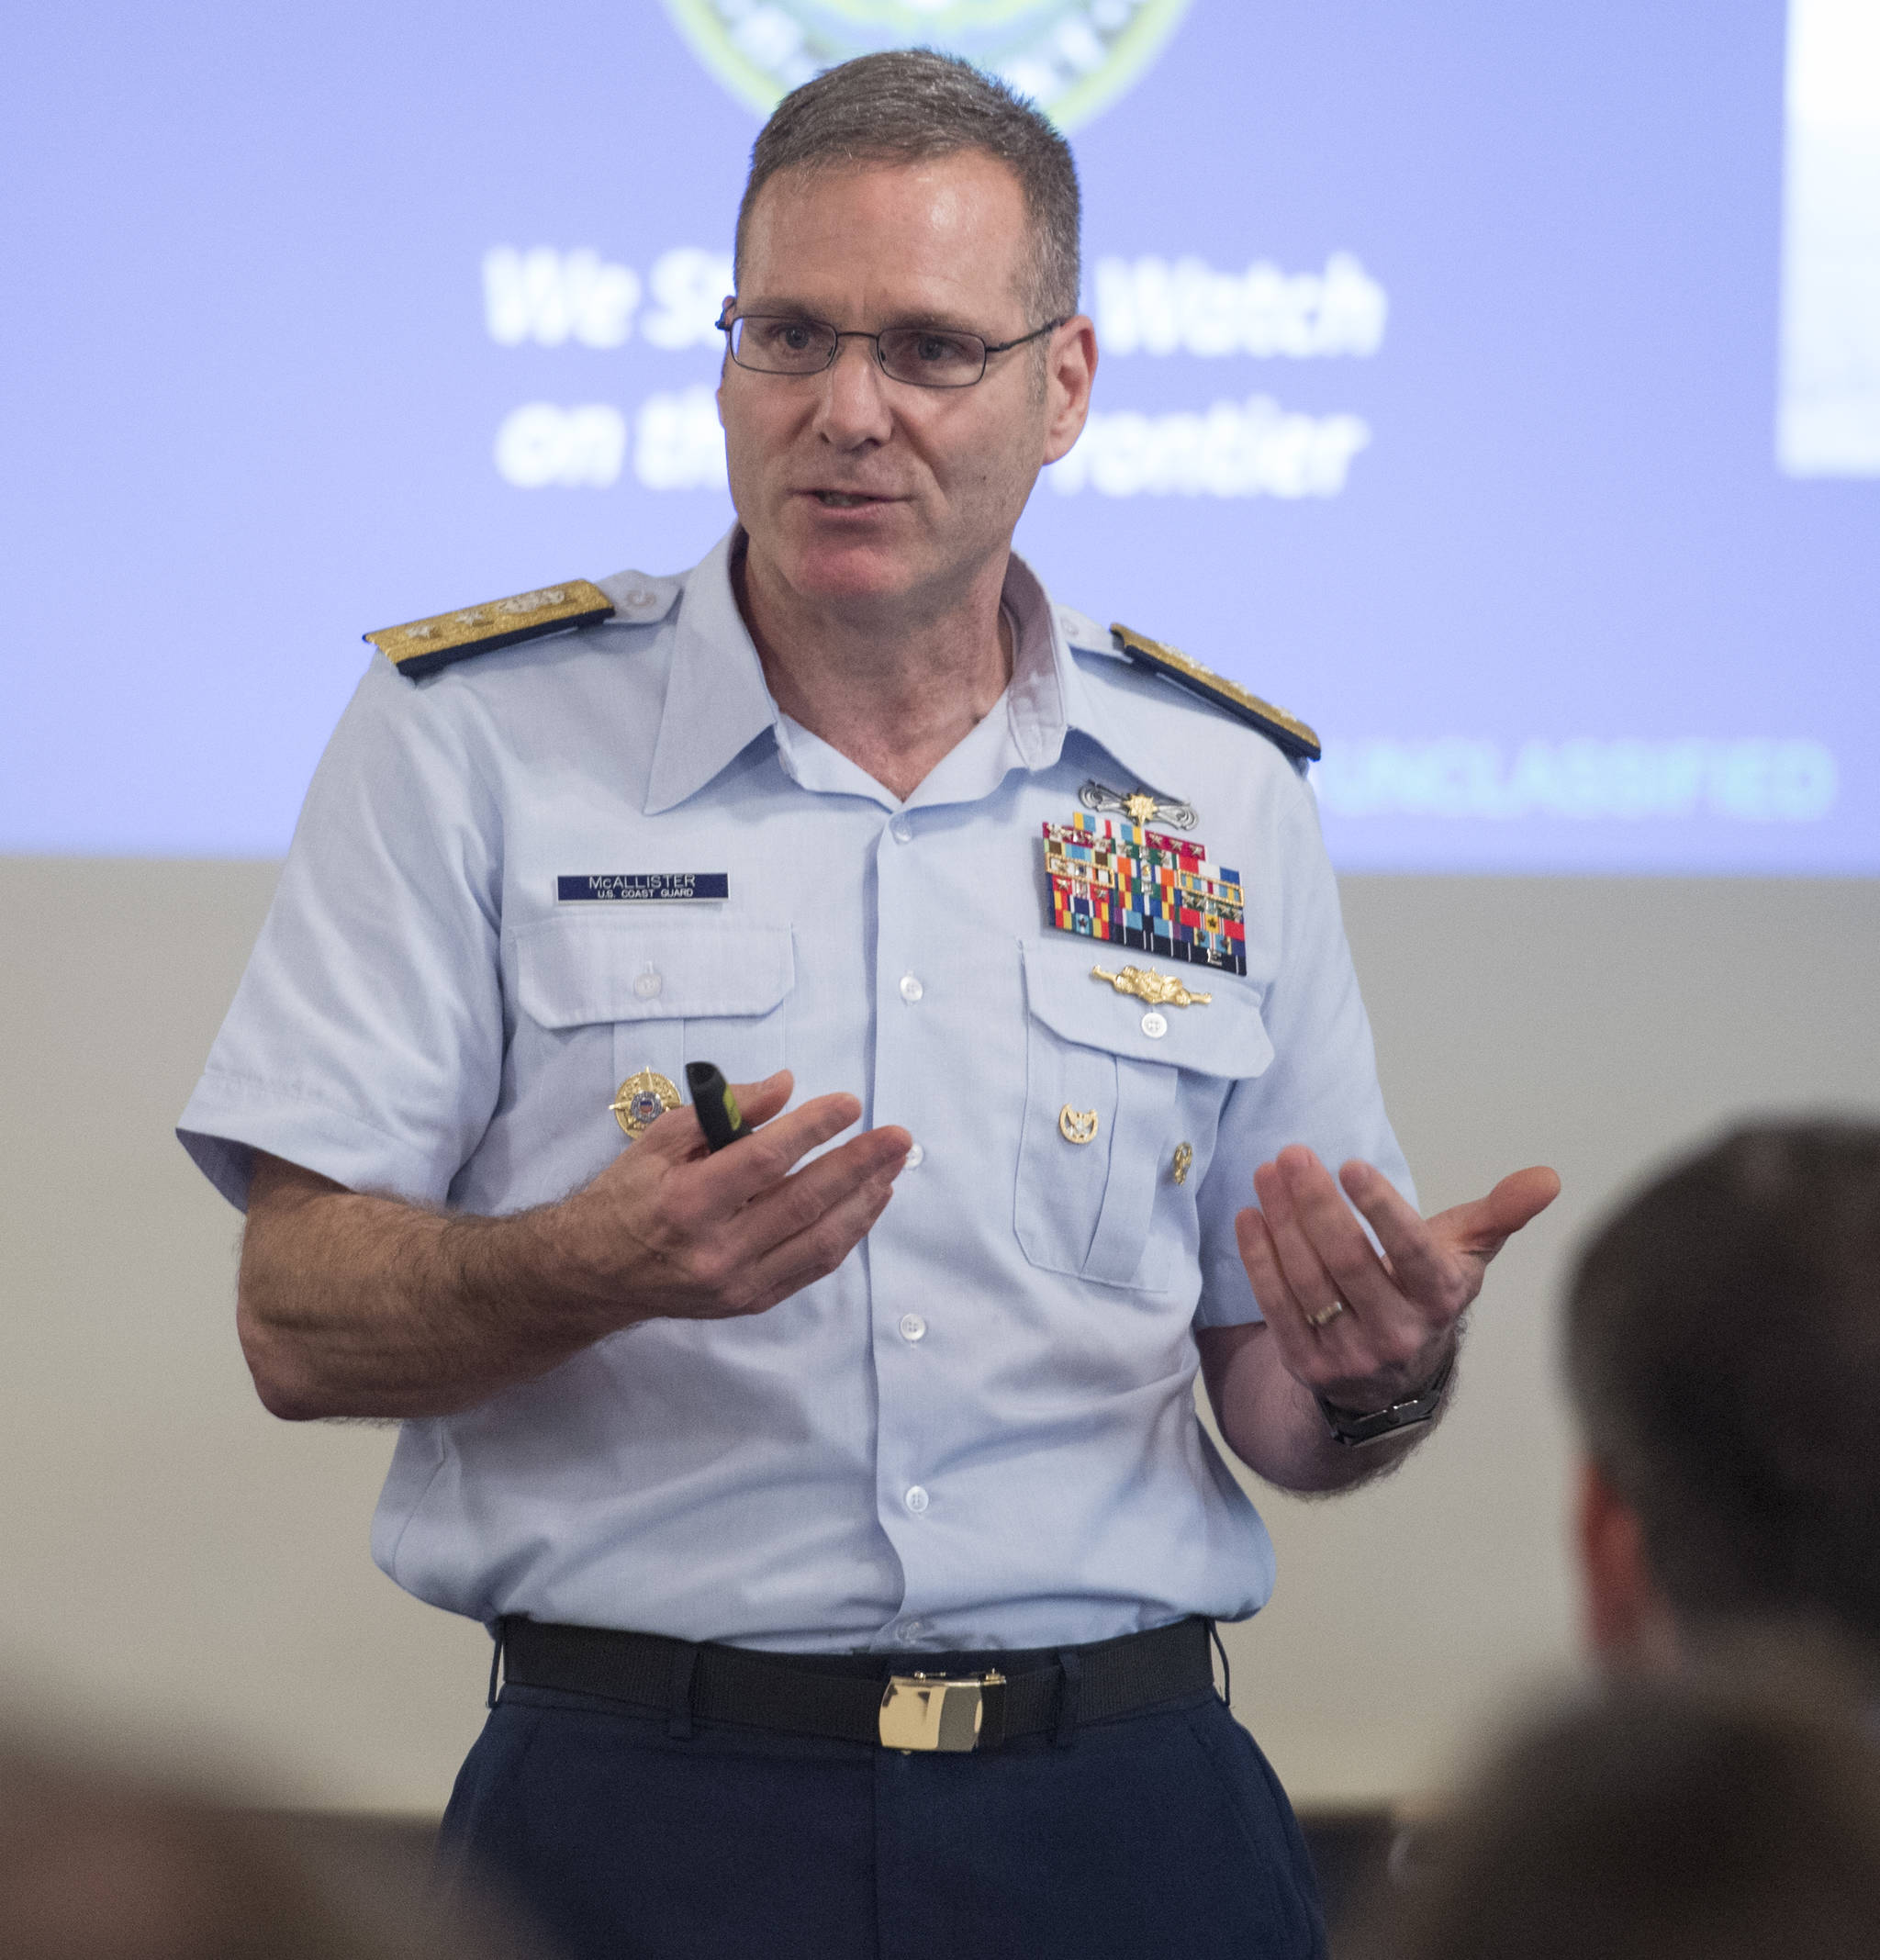 Rear Admiral Michael McAllister, Commander of the U.S. Coast Guard’s 17th District, speaks to the Juneau Chamber of Commerce at the Moose Lodge on Thursday, July 20, 2017. (Michael Penn | Juneau Empire)